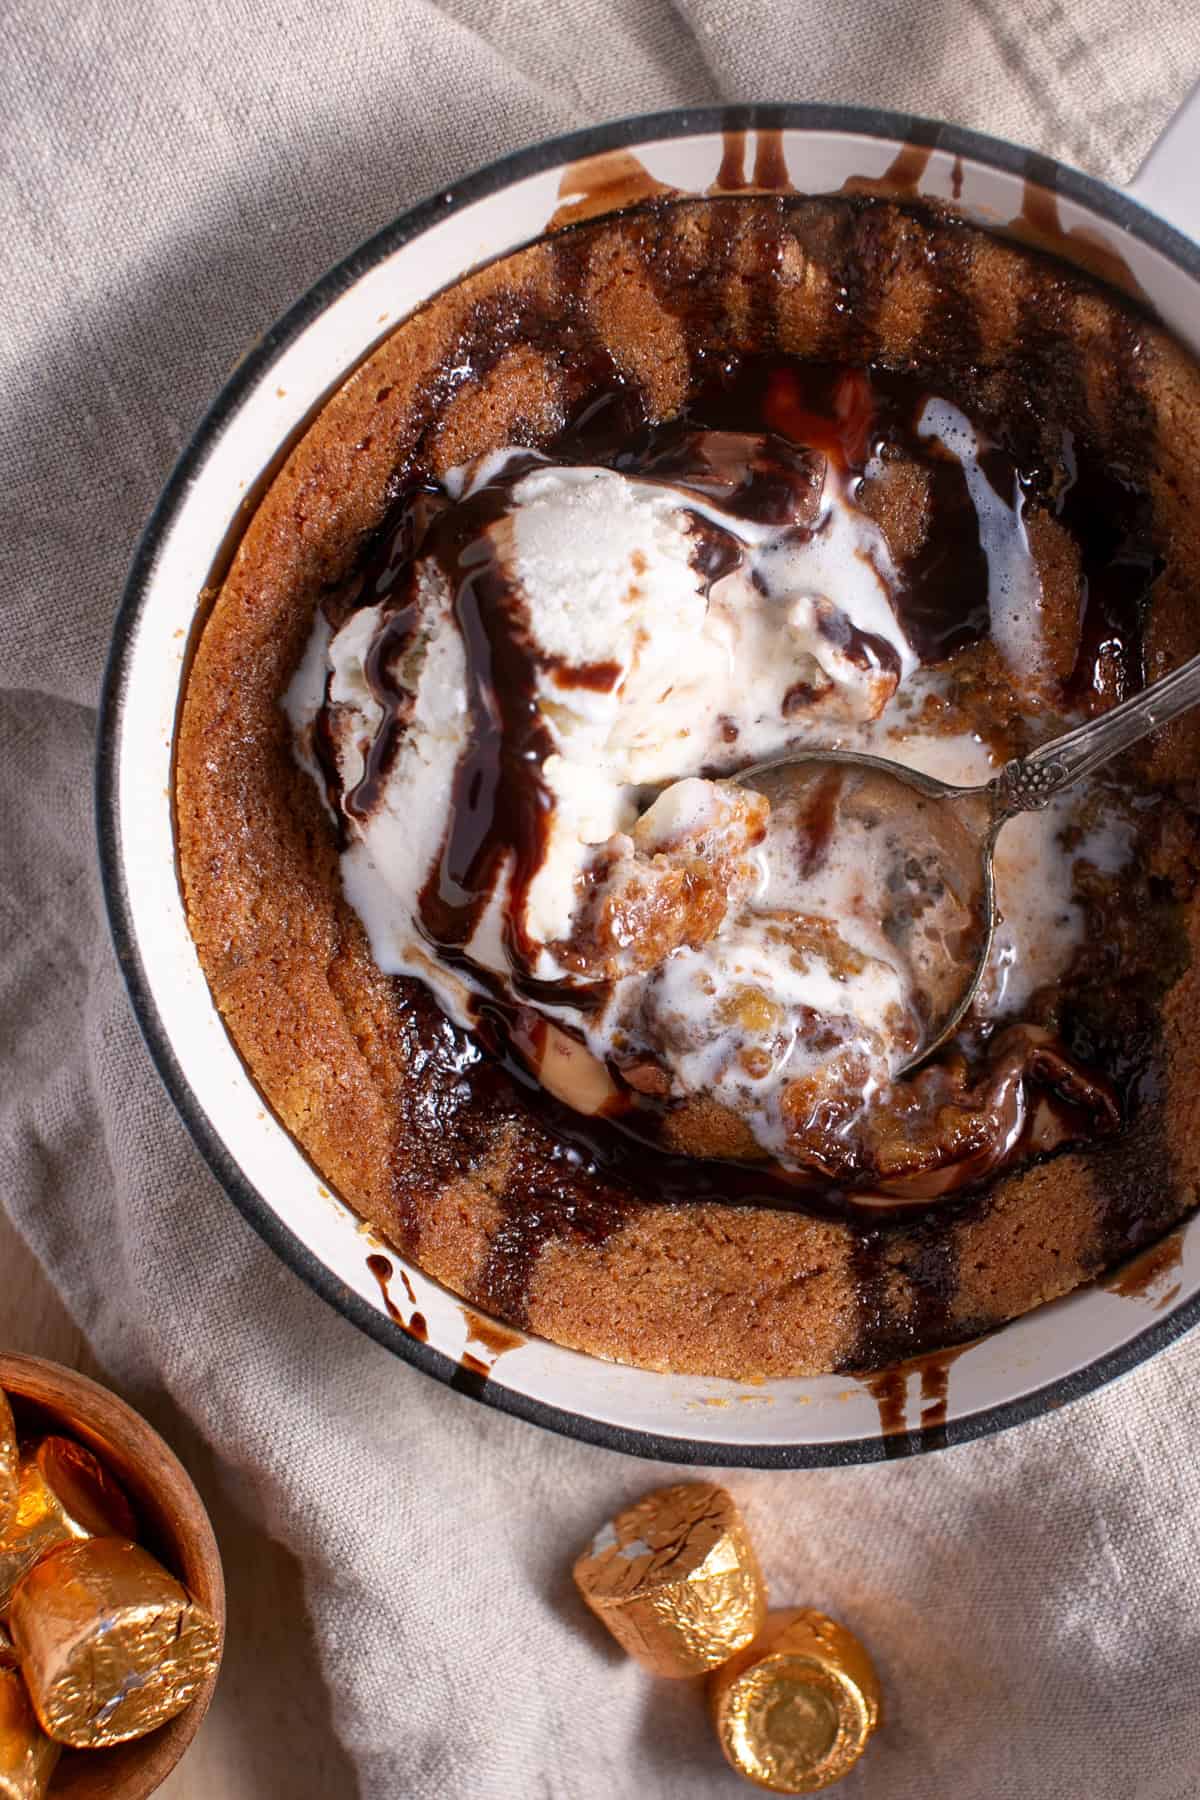 Skillet Chocolate Caramel Cookie with a drizzle of chocolate syrup. 